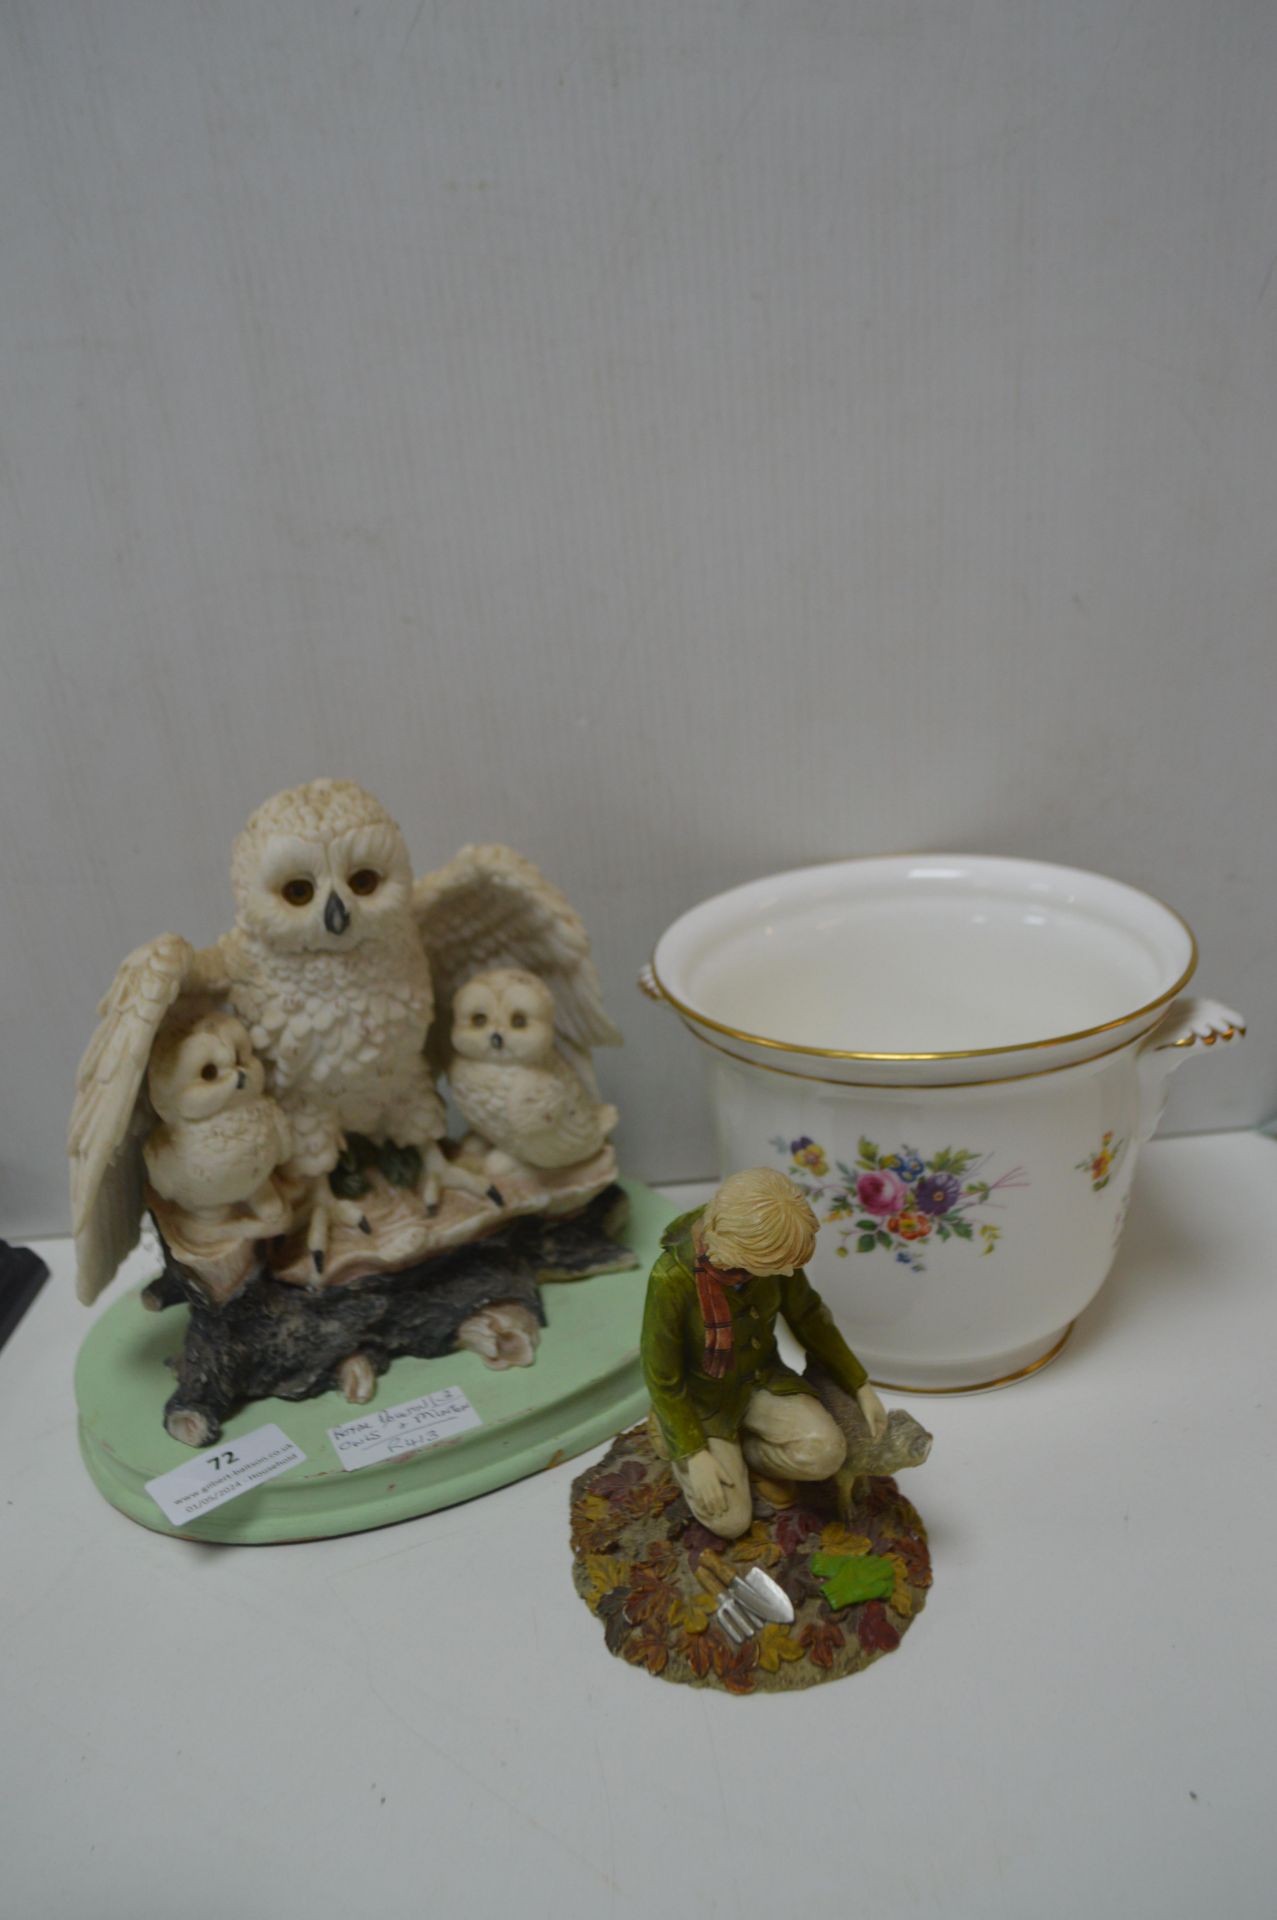 Minton Plater, Royal Doulton Gardening Figure, and